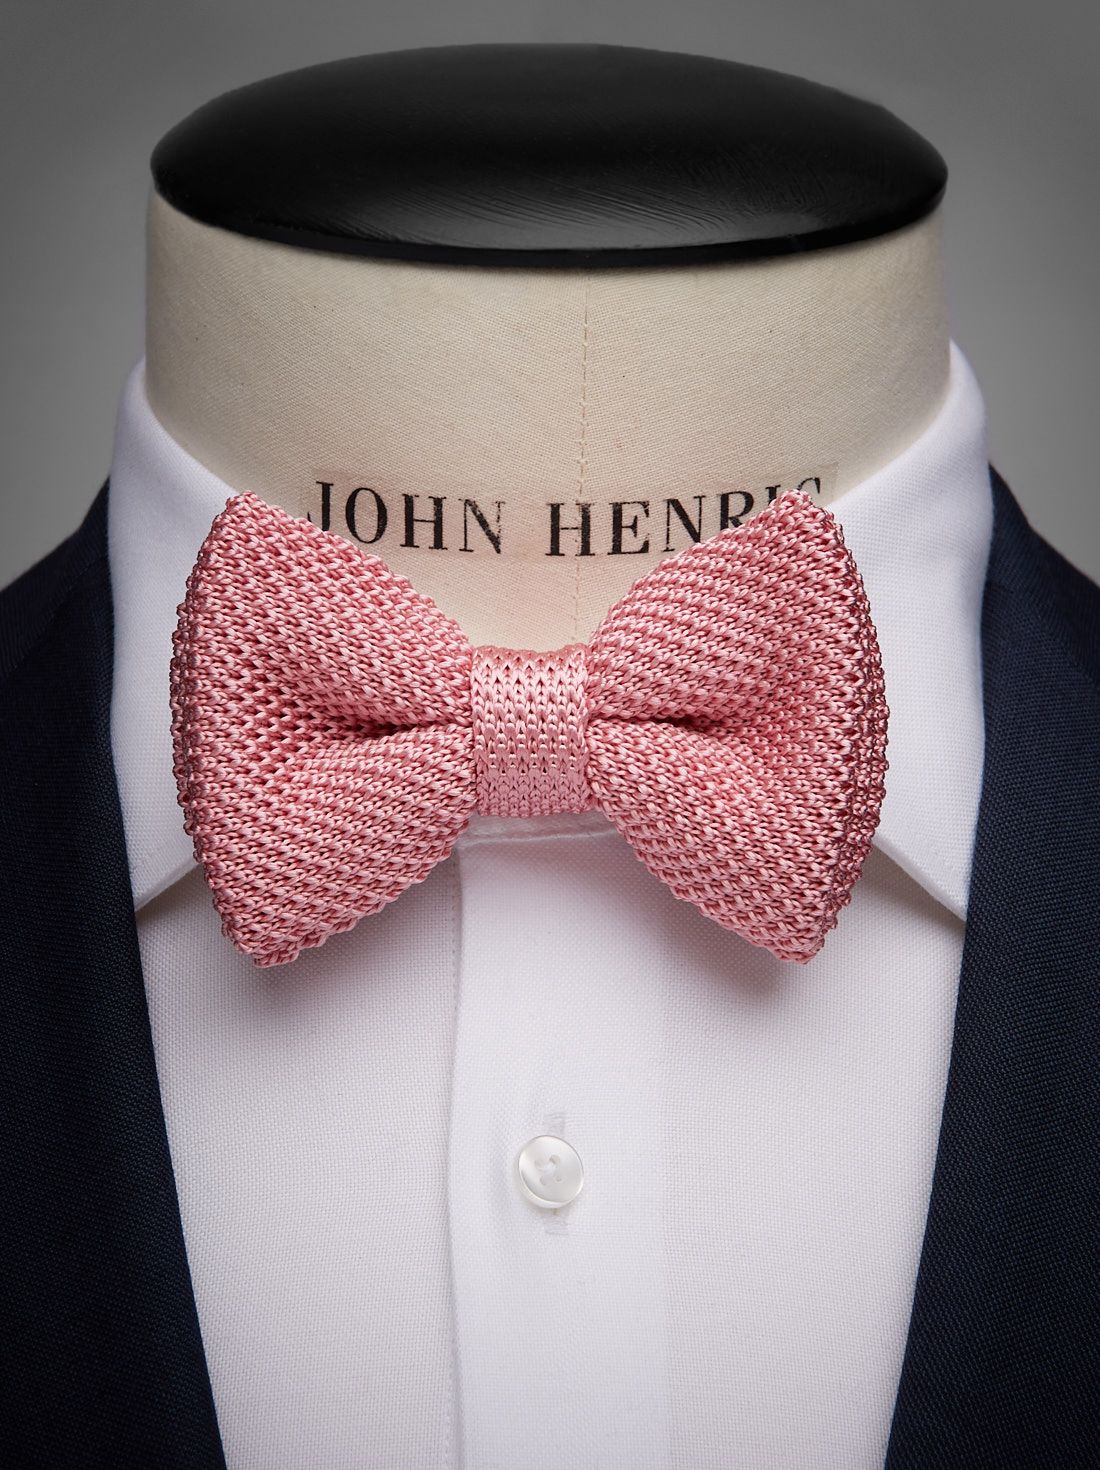 Pink Knitted Bow Tie